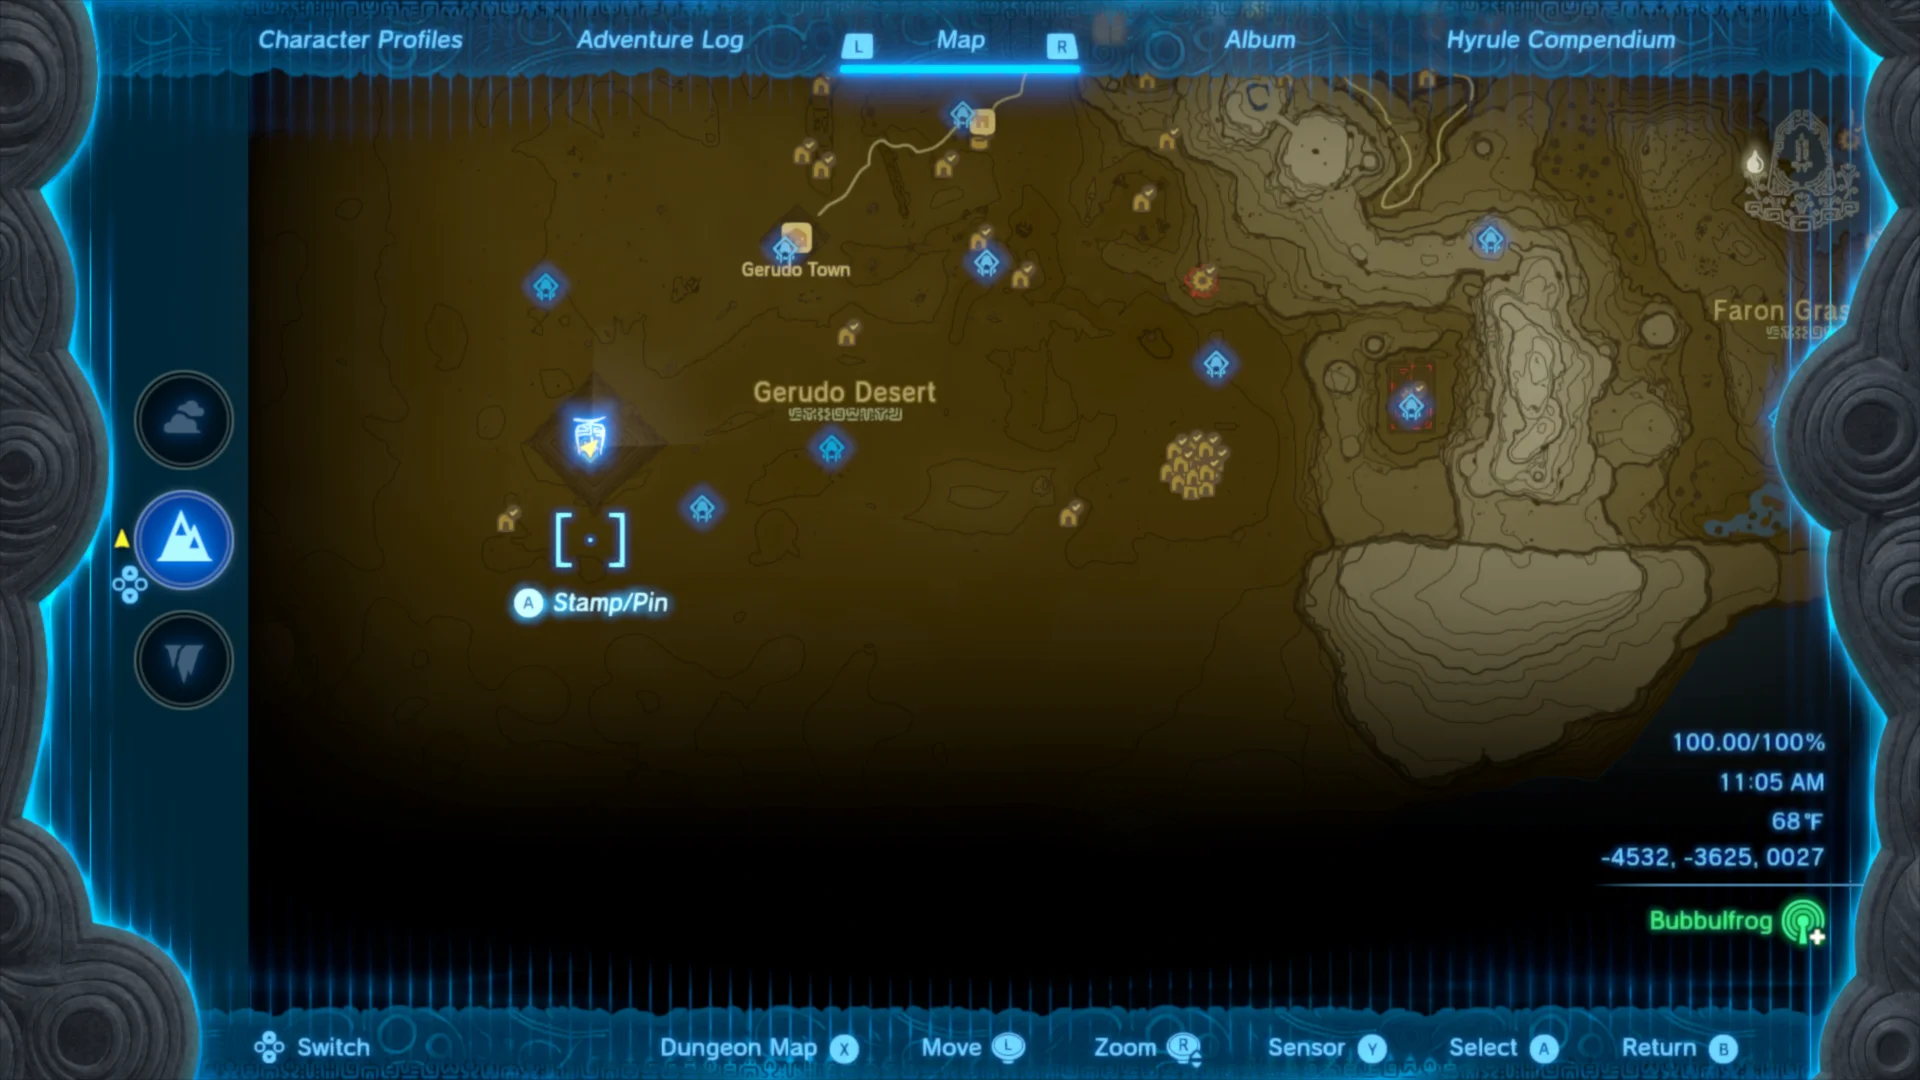 The game map screen showing a player location at coordinates (-4532, -3645, 27), with the triangle representing player location placed on top of a large blue icon.